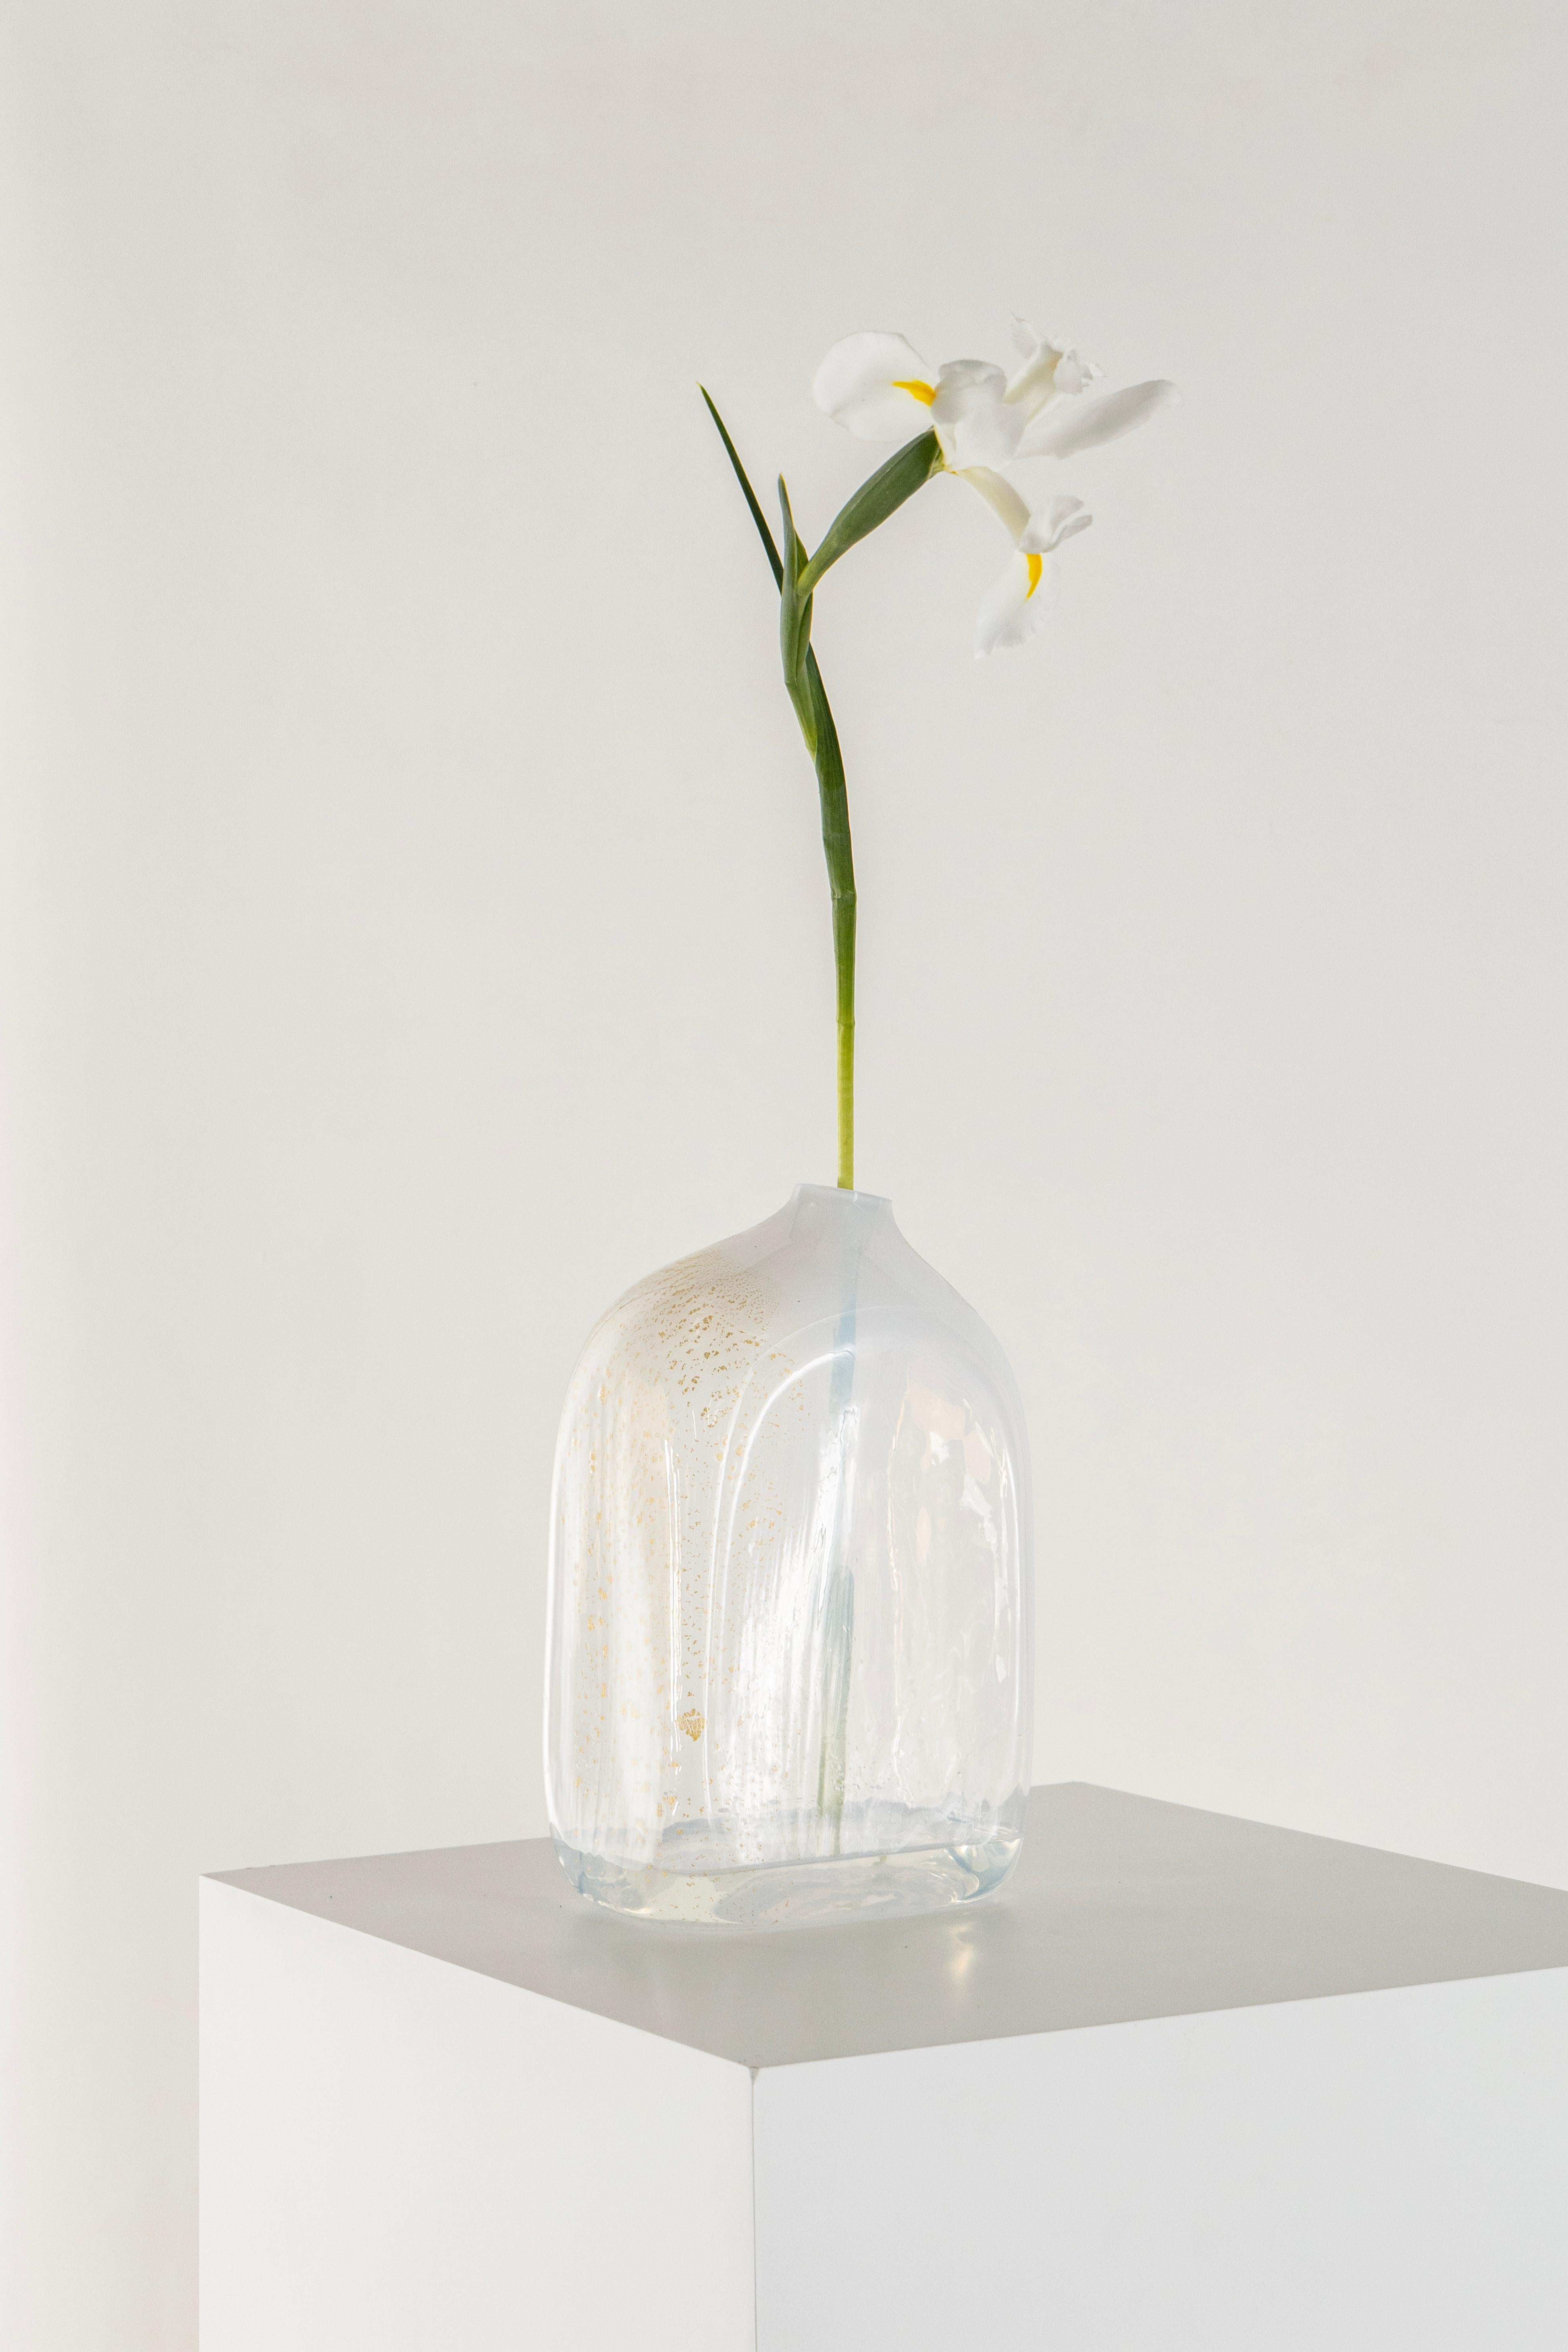 This limited edition of vases joins the Aurum collection: magnificent, enigmatic, and sensual.

Through careful experimentation of the traditional glass-blowing technique, the vases were fused with very fine sheets of 23-karat gold, which fragmented